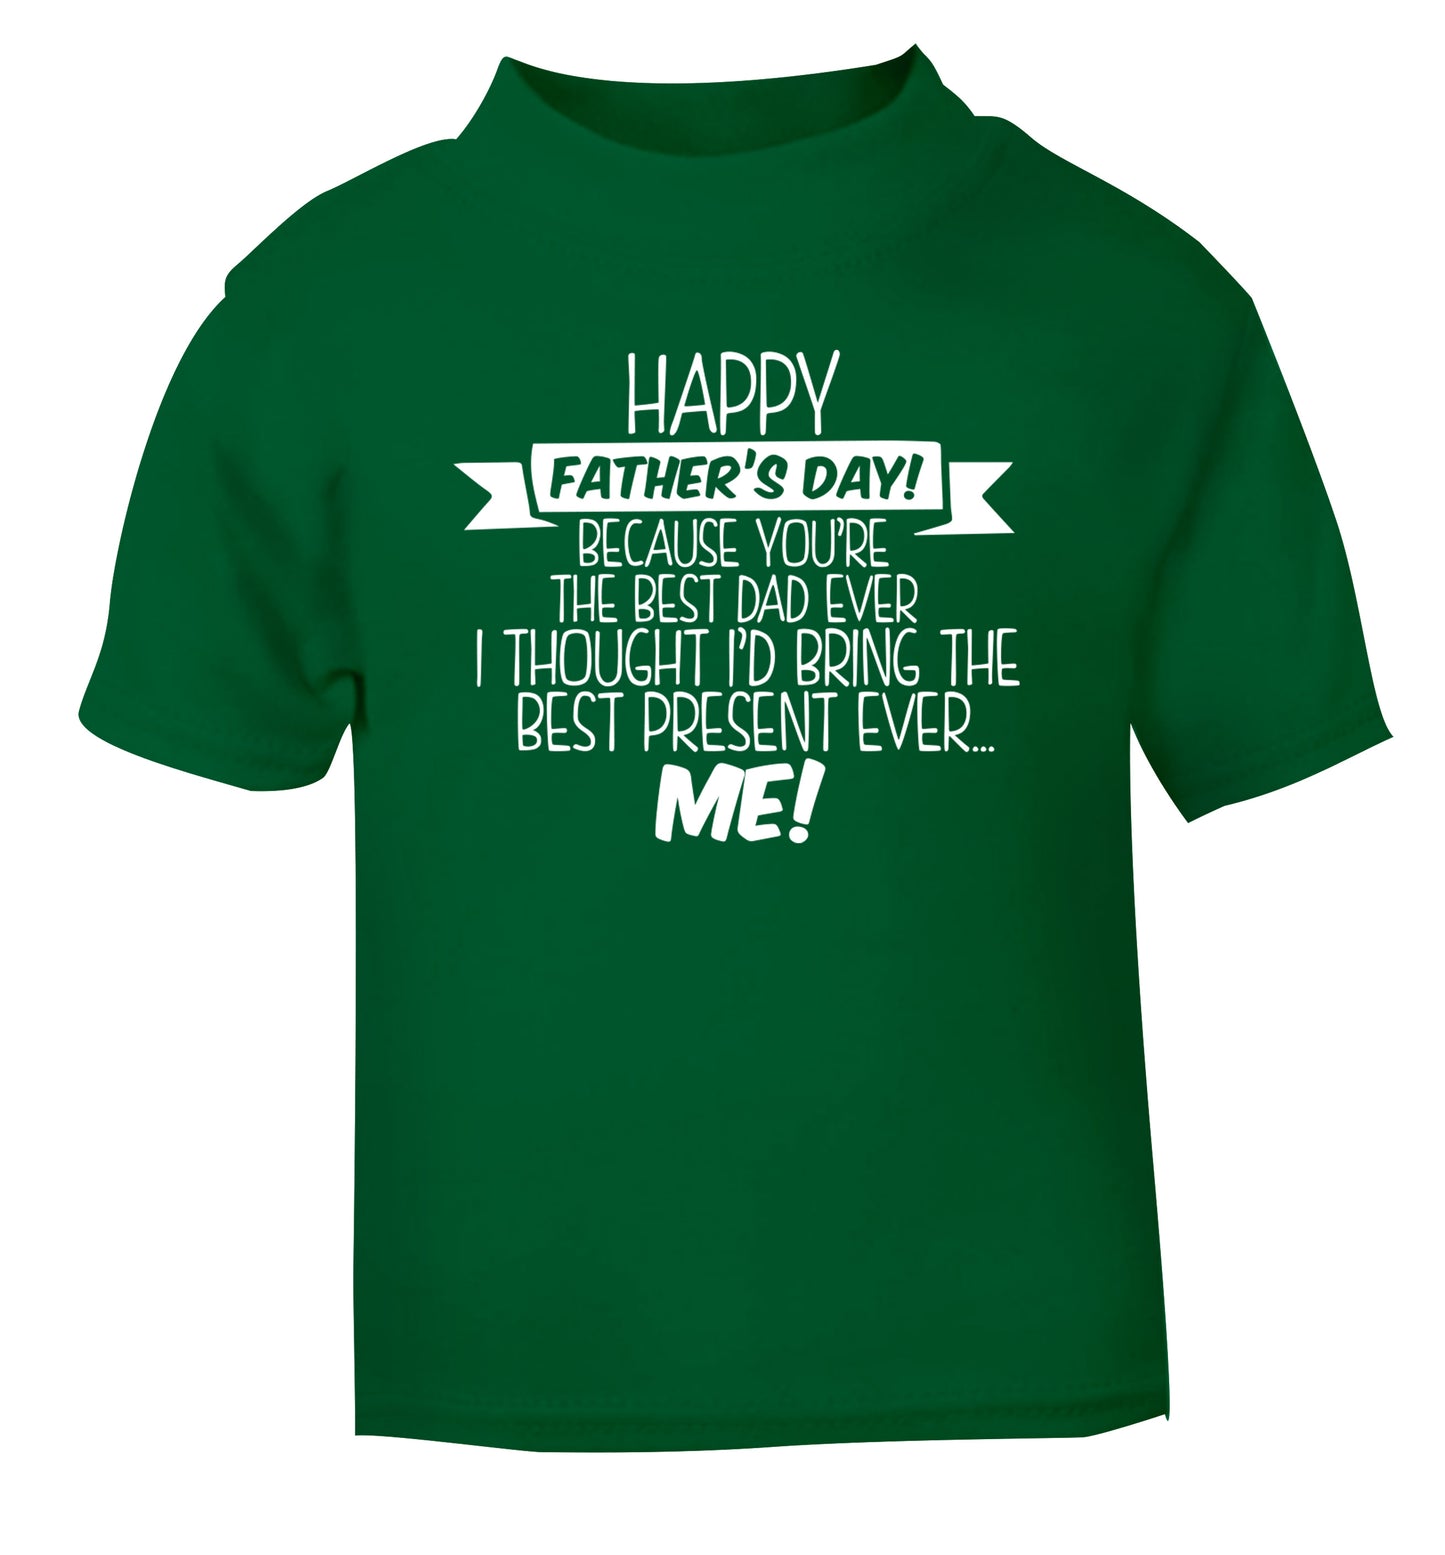 Happy Father's day, because you're the best dad ever I thought I'd bring the best present ever...me! green Baby Toddler Tshirt 2 Years